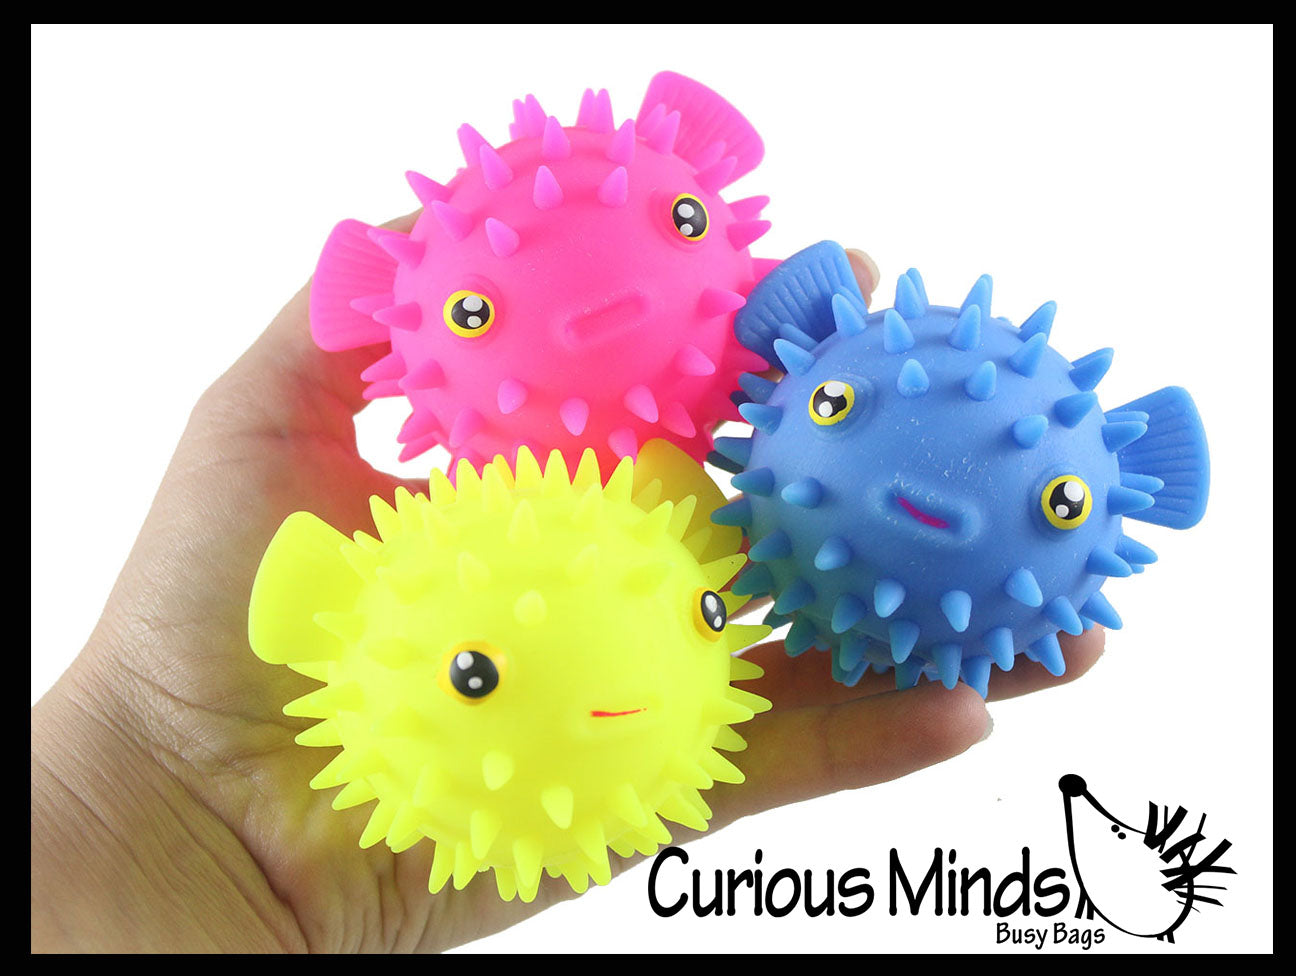 Puffer Fish Puffer Ball - Small Novelty Toy - Party Favors - Air Filled Sensory Fidget Toys